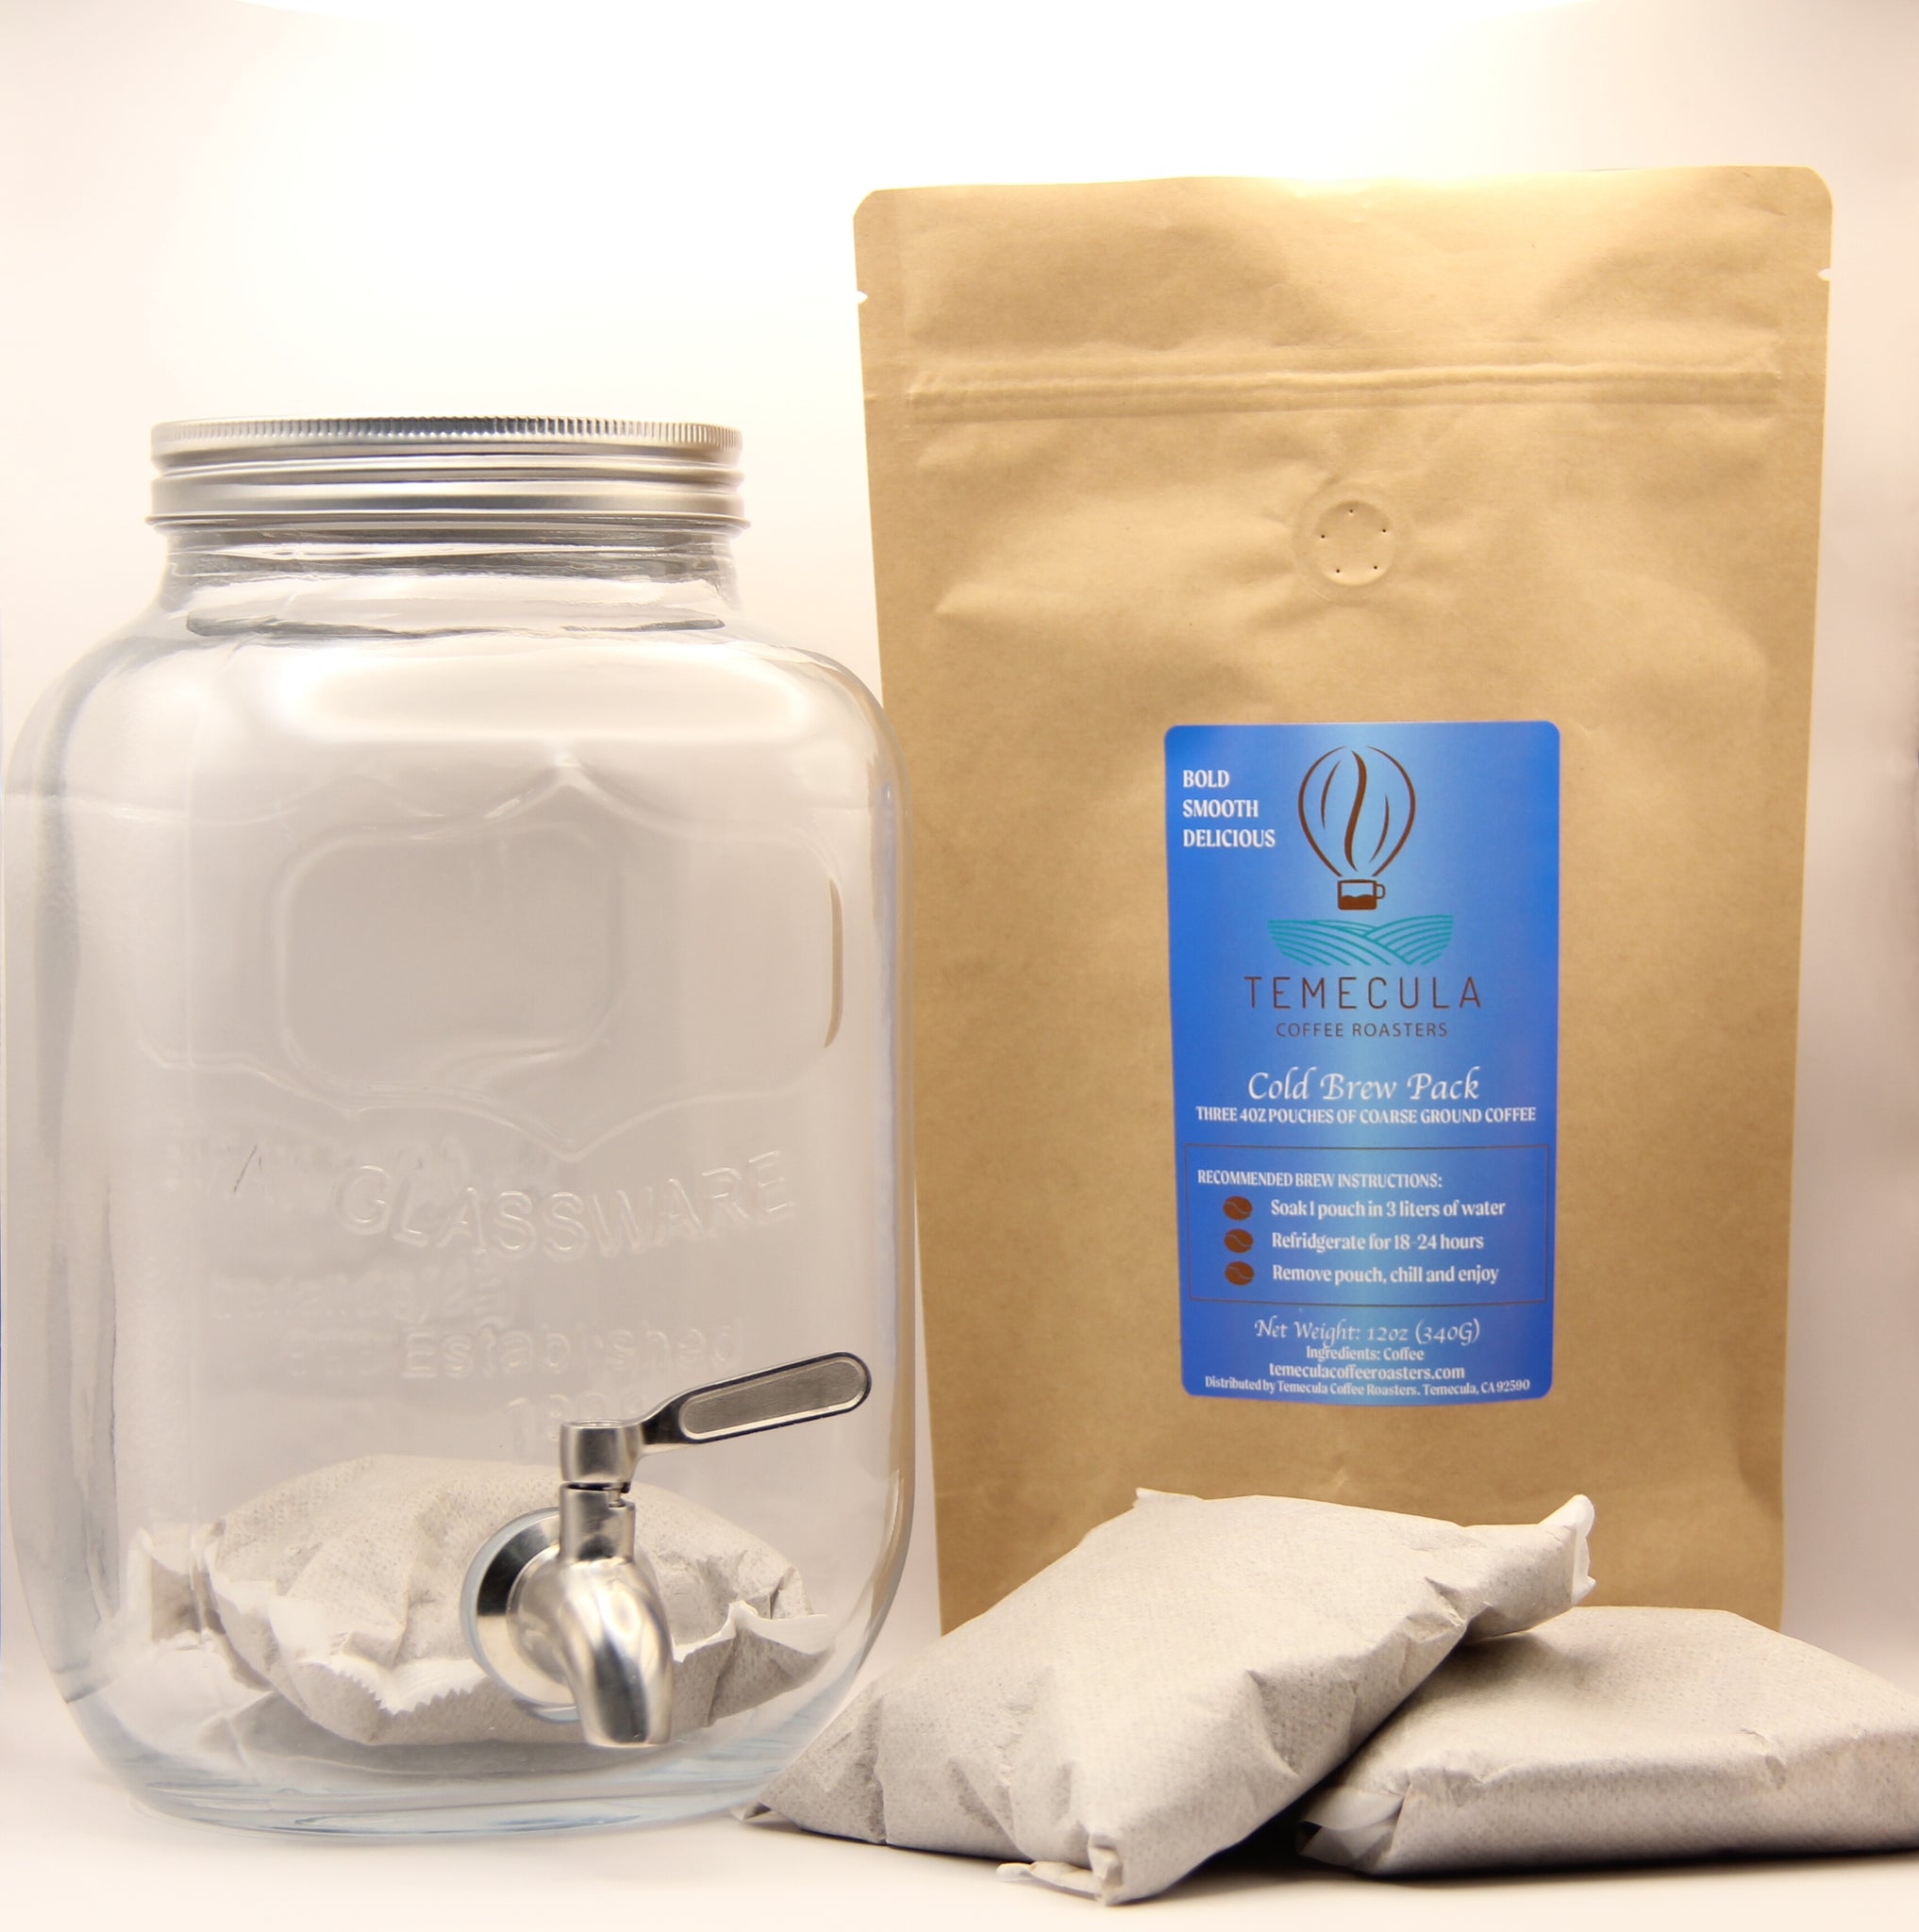 New Product Alert! The TCR Cold Brew Pouch